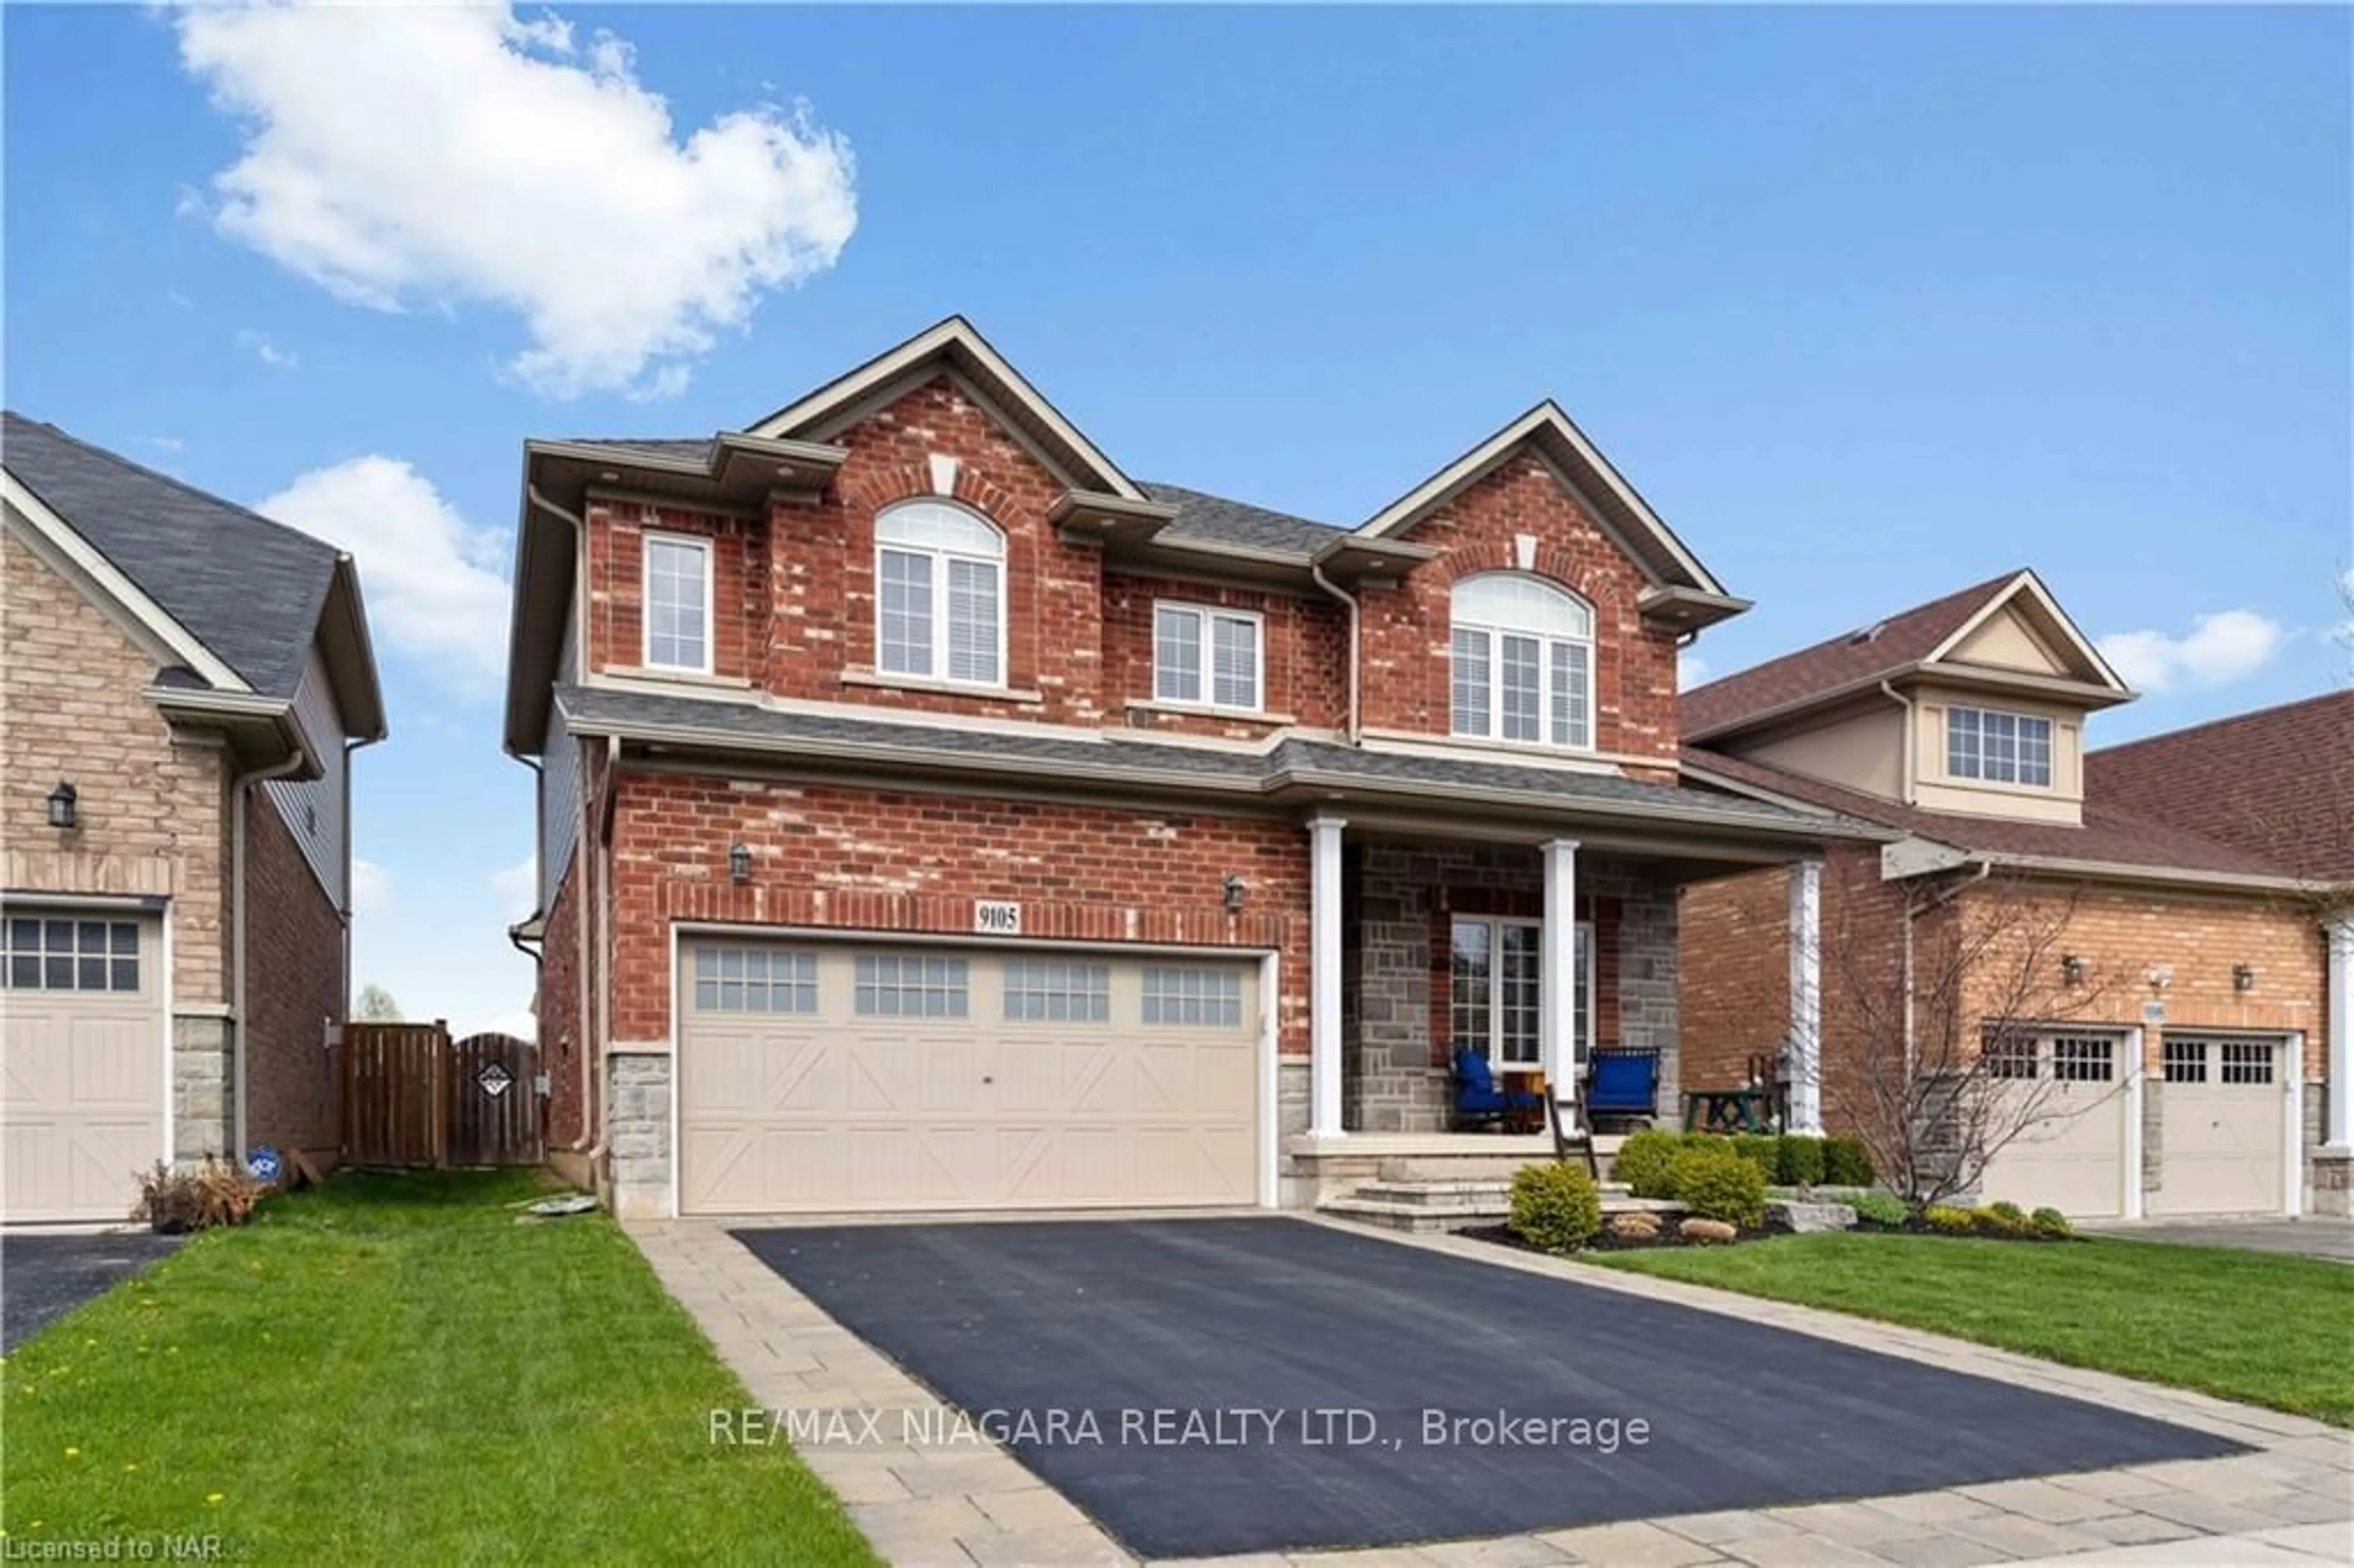 Home with brick exterior material for 9105 White Oak Ave, Niagara-on-the-Lake Ontario L2G 0E9